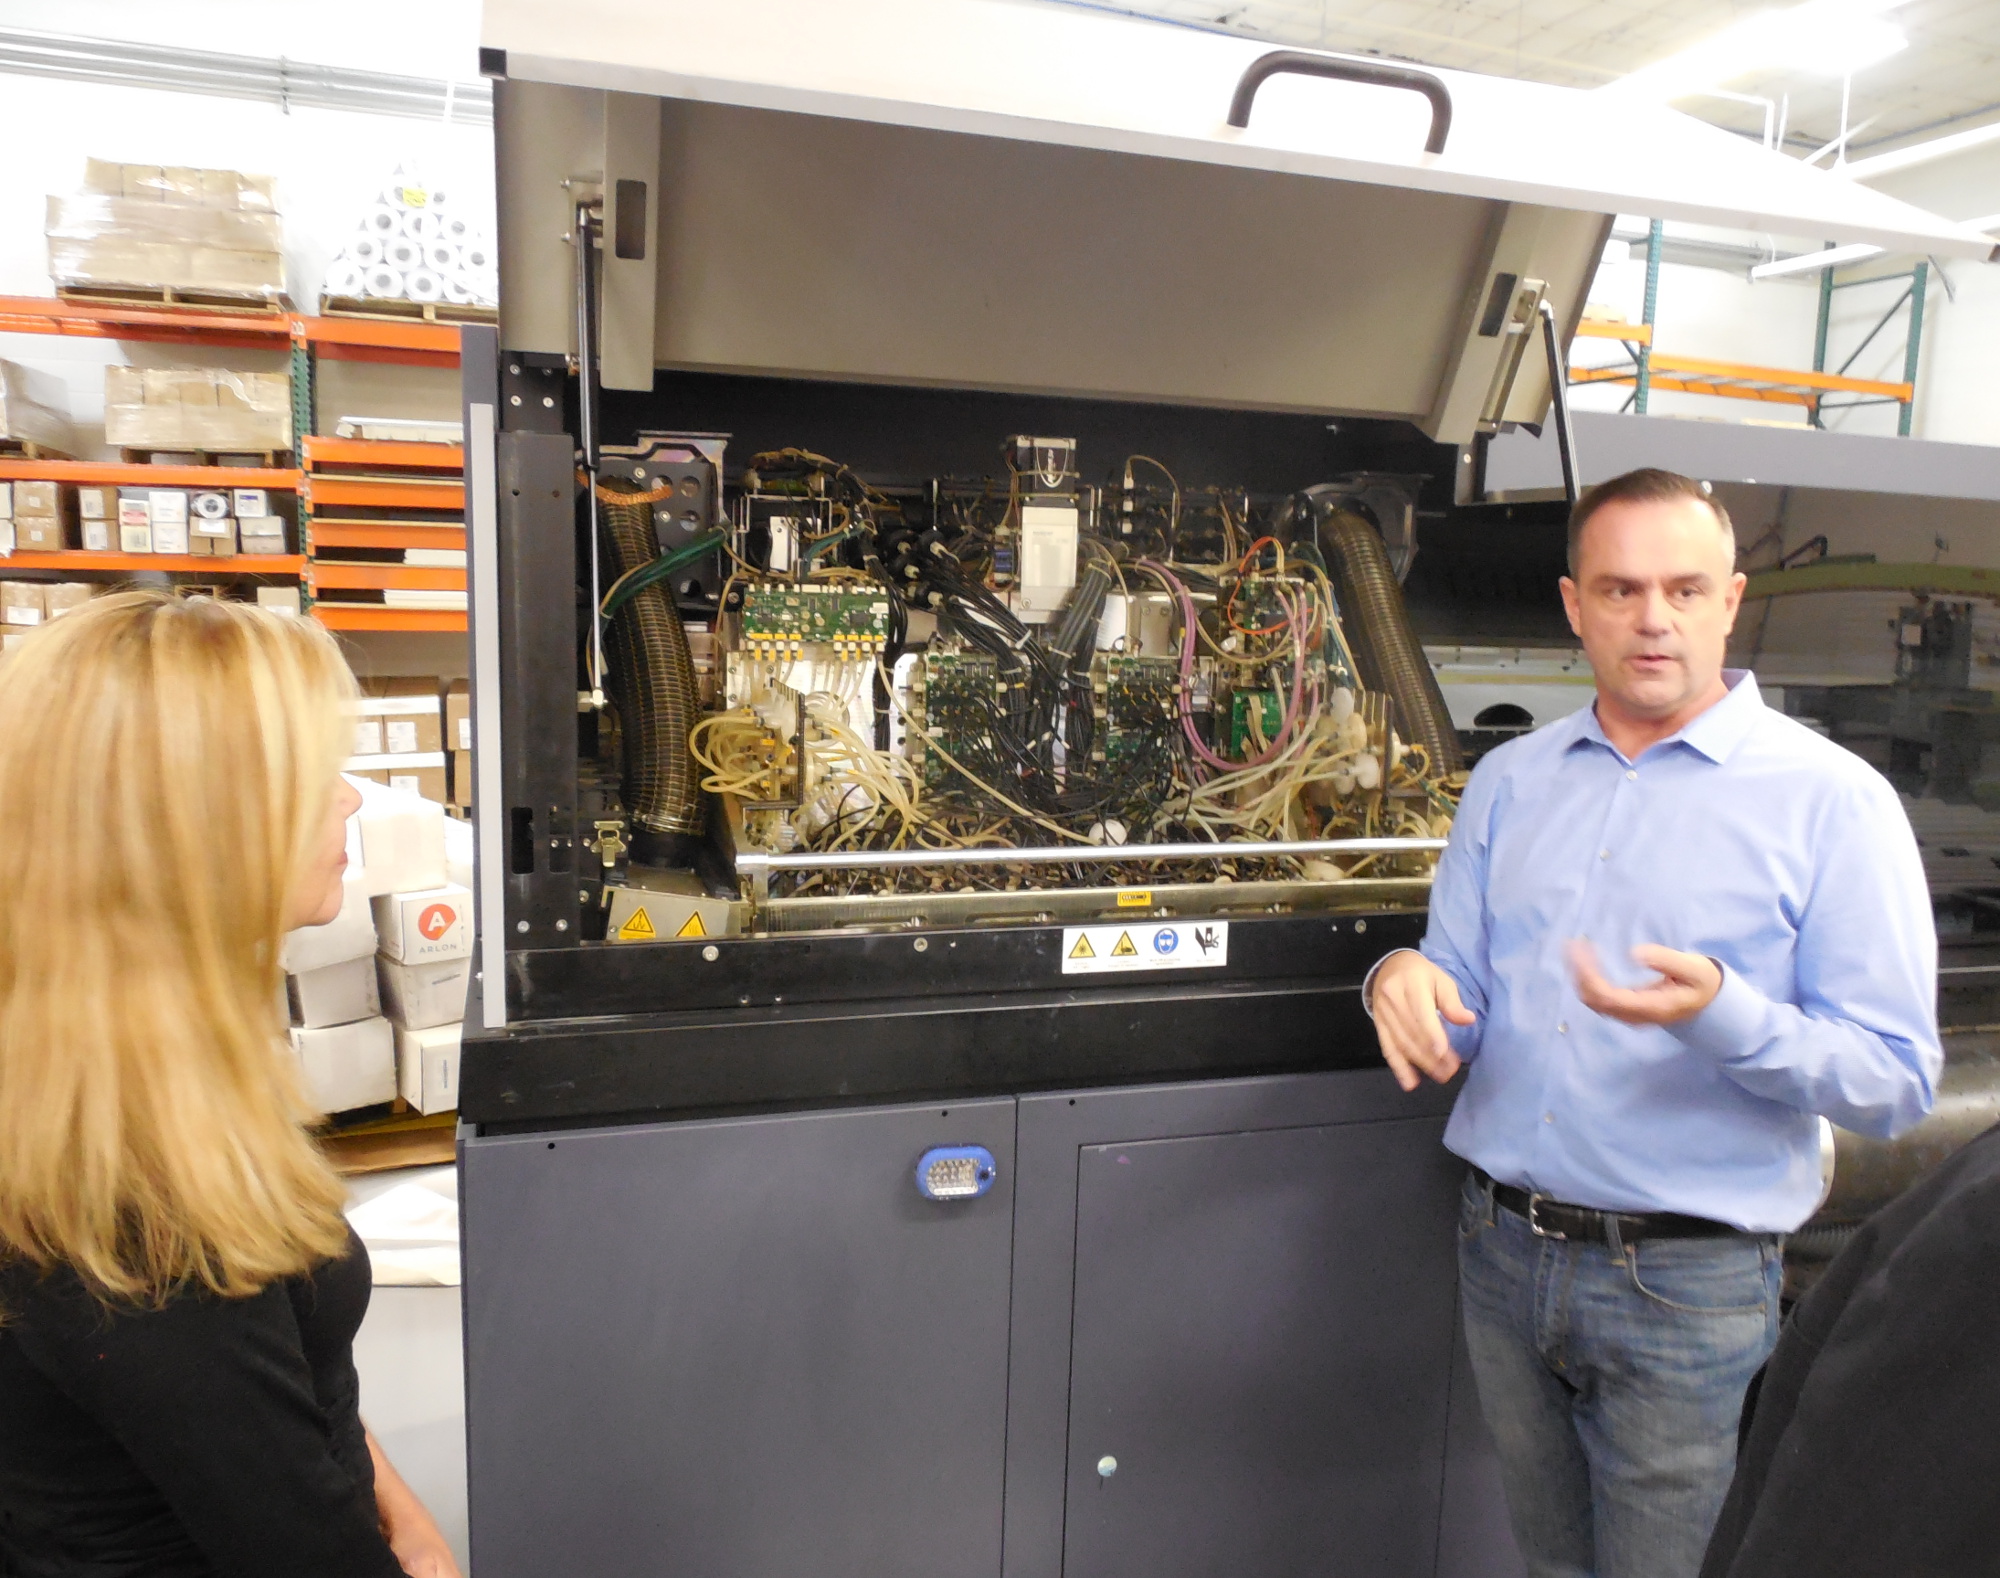 Josh Bevans shows off a high-tech printing press to Small Business Administration Regional Director Betsy Marky during a tour of Design to Print, St. George, Utah, Nov. 17, 2016 | Photo by Julie Applegate, St. George News